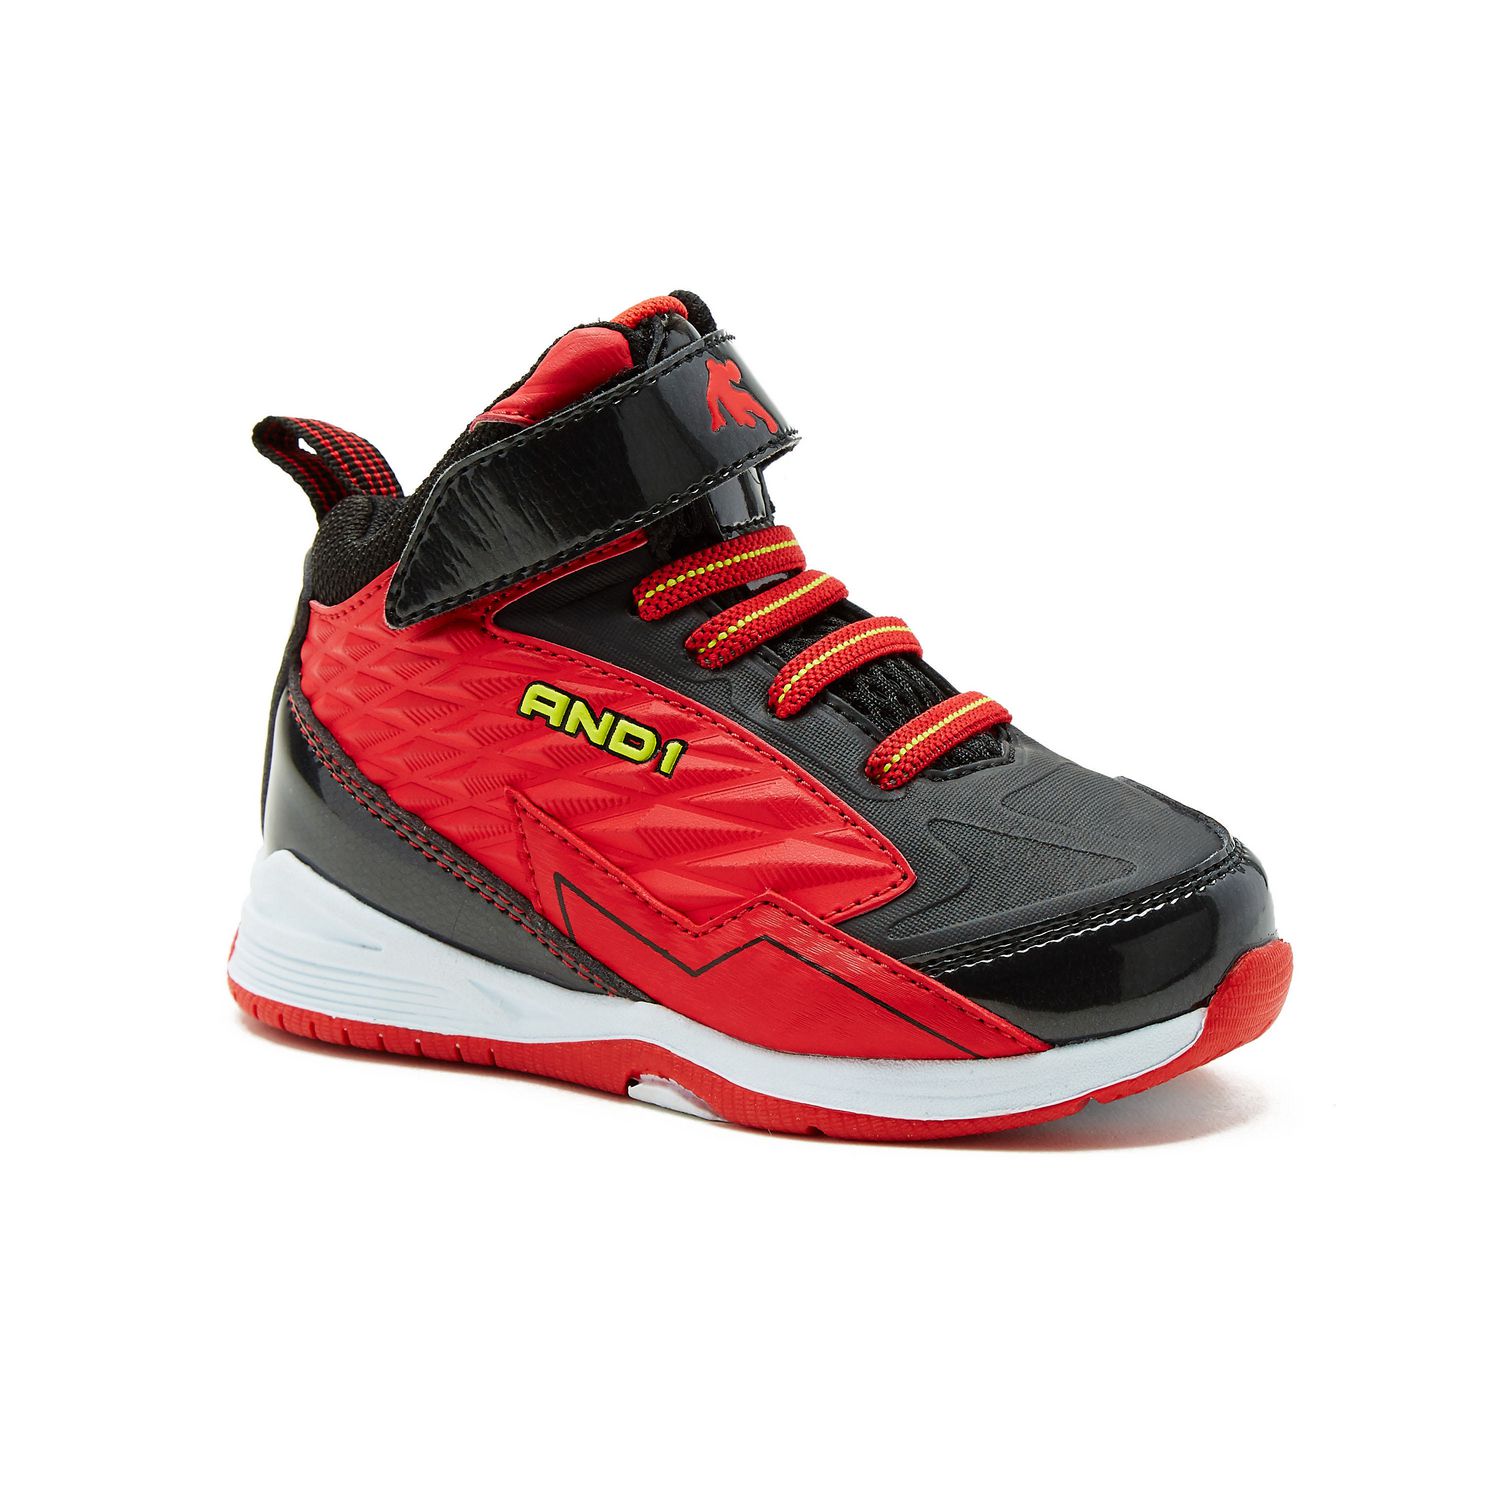 AND1 Boys' Assist Basketball Shoes | Walmart Canada